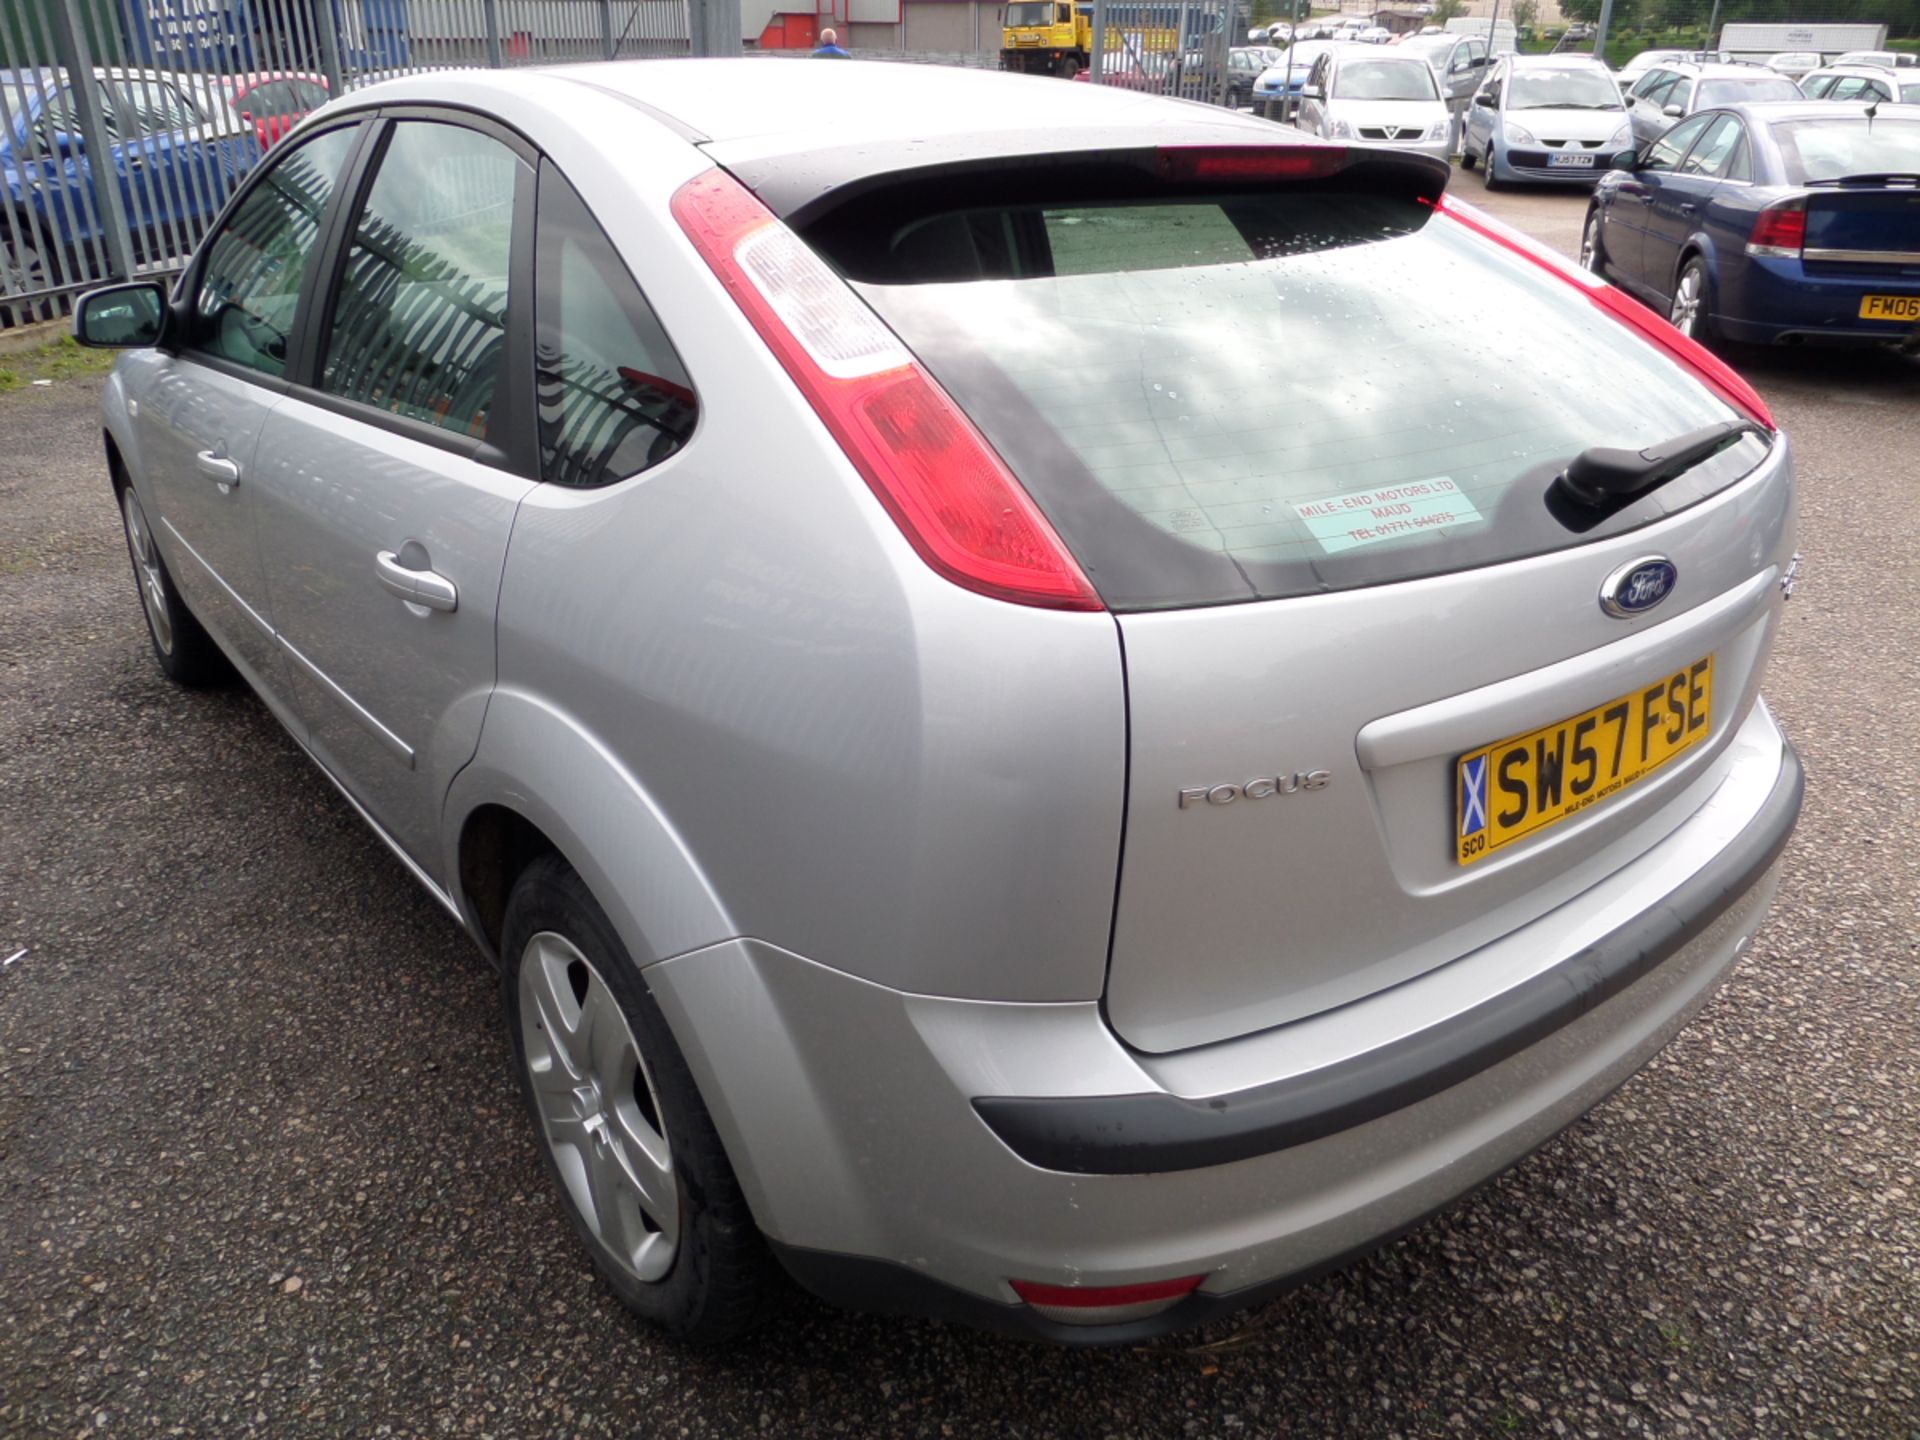 Ford Focus Style 125 - 1798cc 5 Door - Image 4 of 11